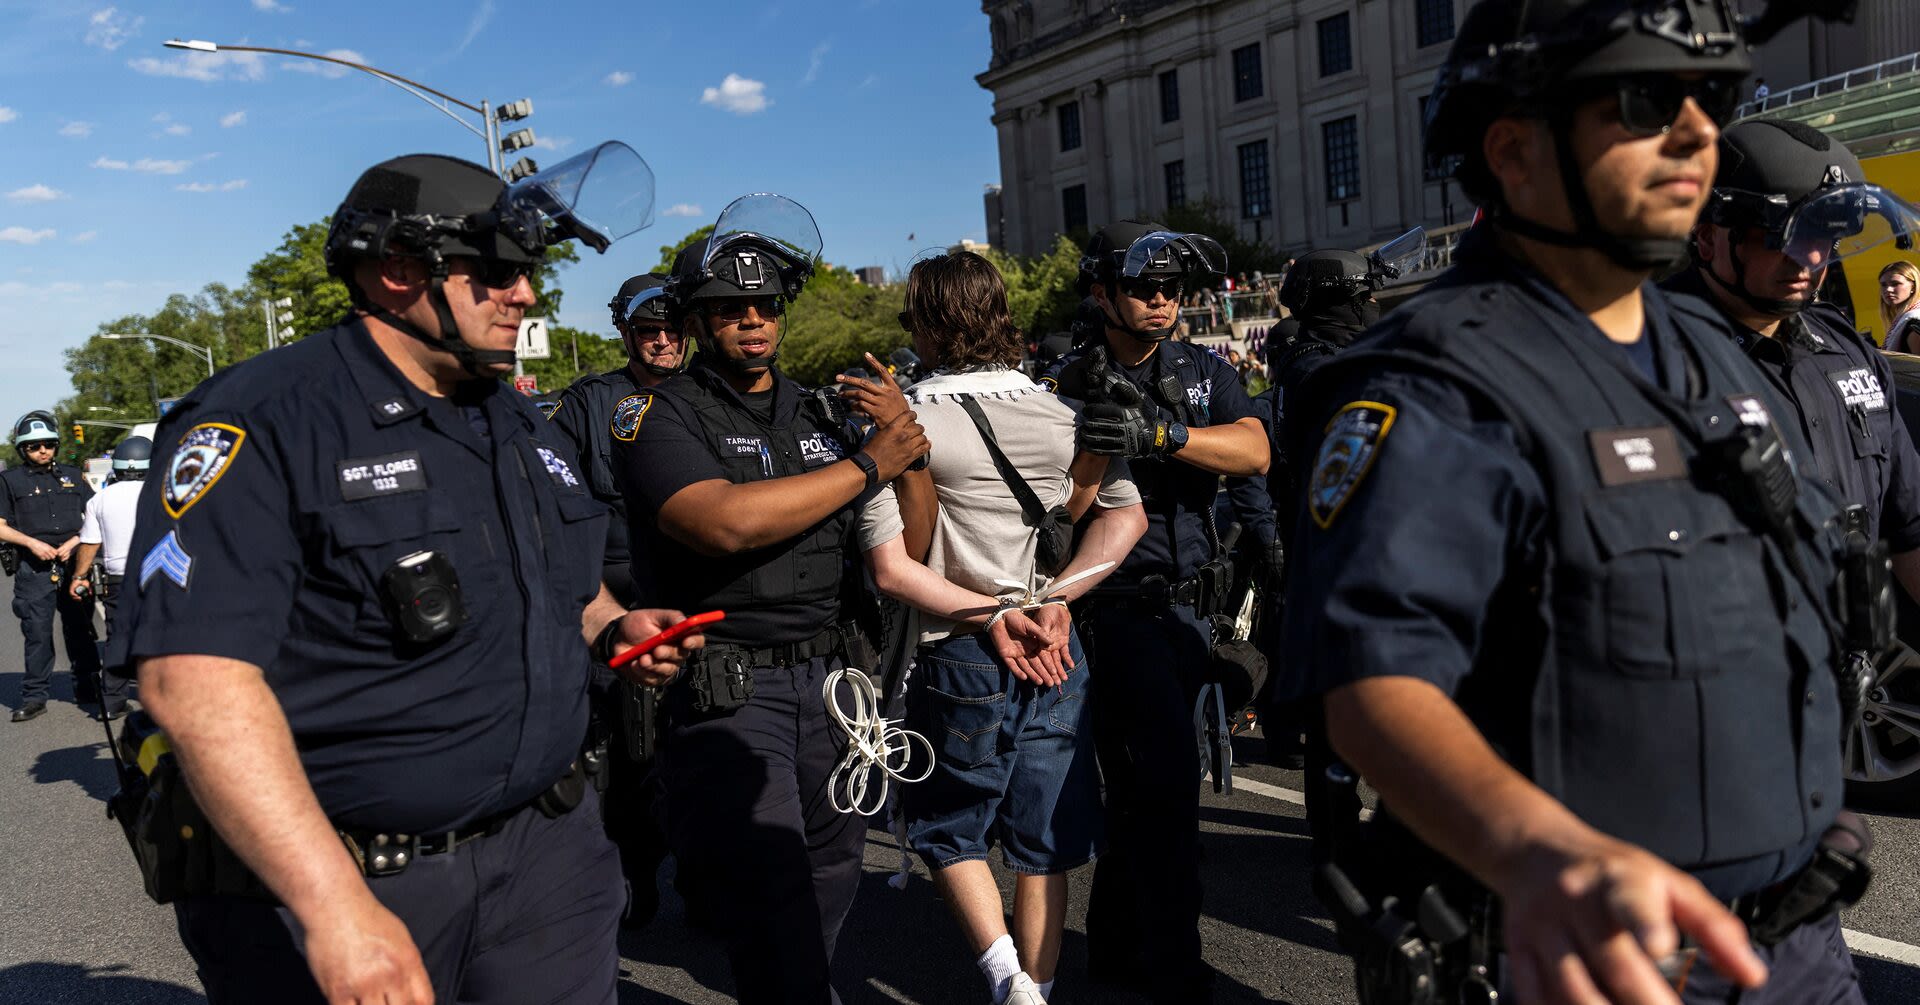 Police say they detained 29 people in pro-Palestinian protests at Brooklyn Museum on Friday